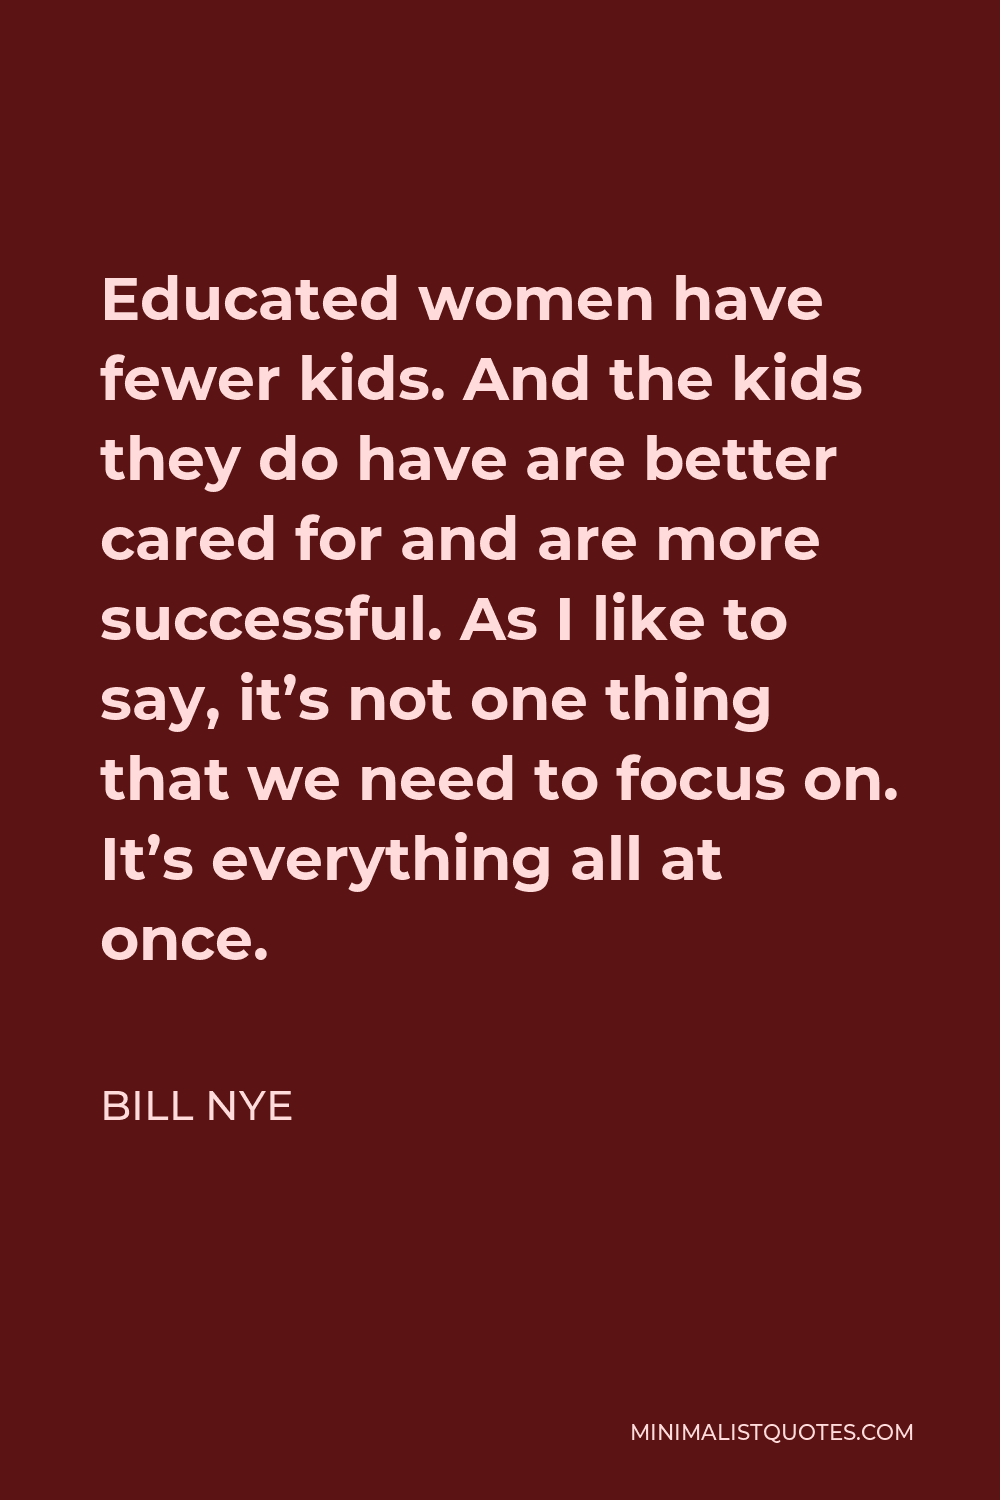 Bill Nye Quote - Educated women have fewer kids. And the kids they do have are better cared for and are more successful. As I like to say, it’s not one thing that we need to focus on. It’s everything all at once.